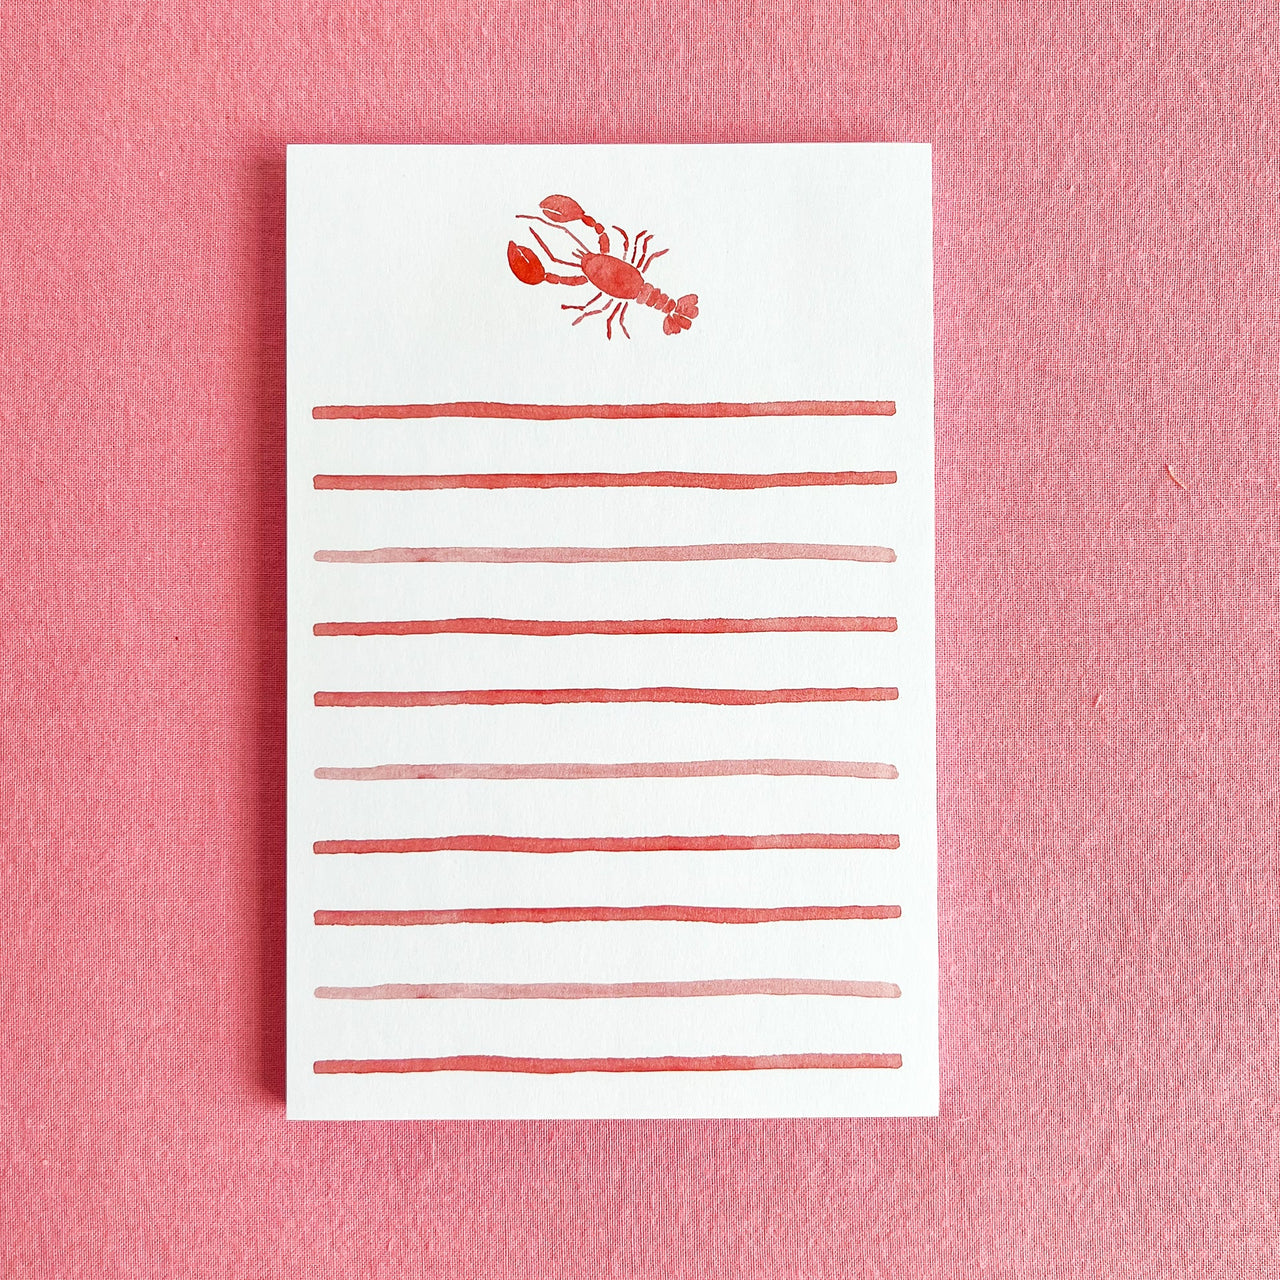 Watercolor Lobster Notepad by Gert & Co